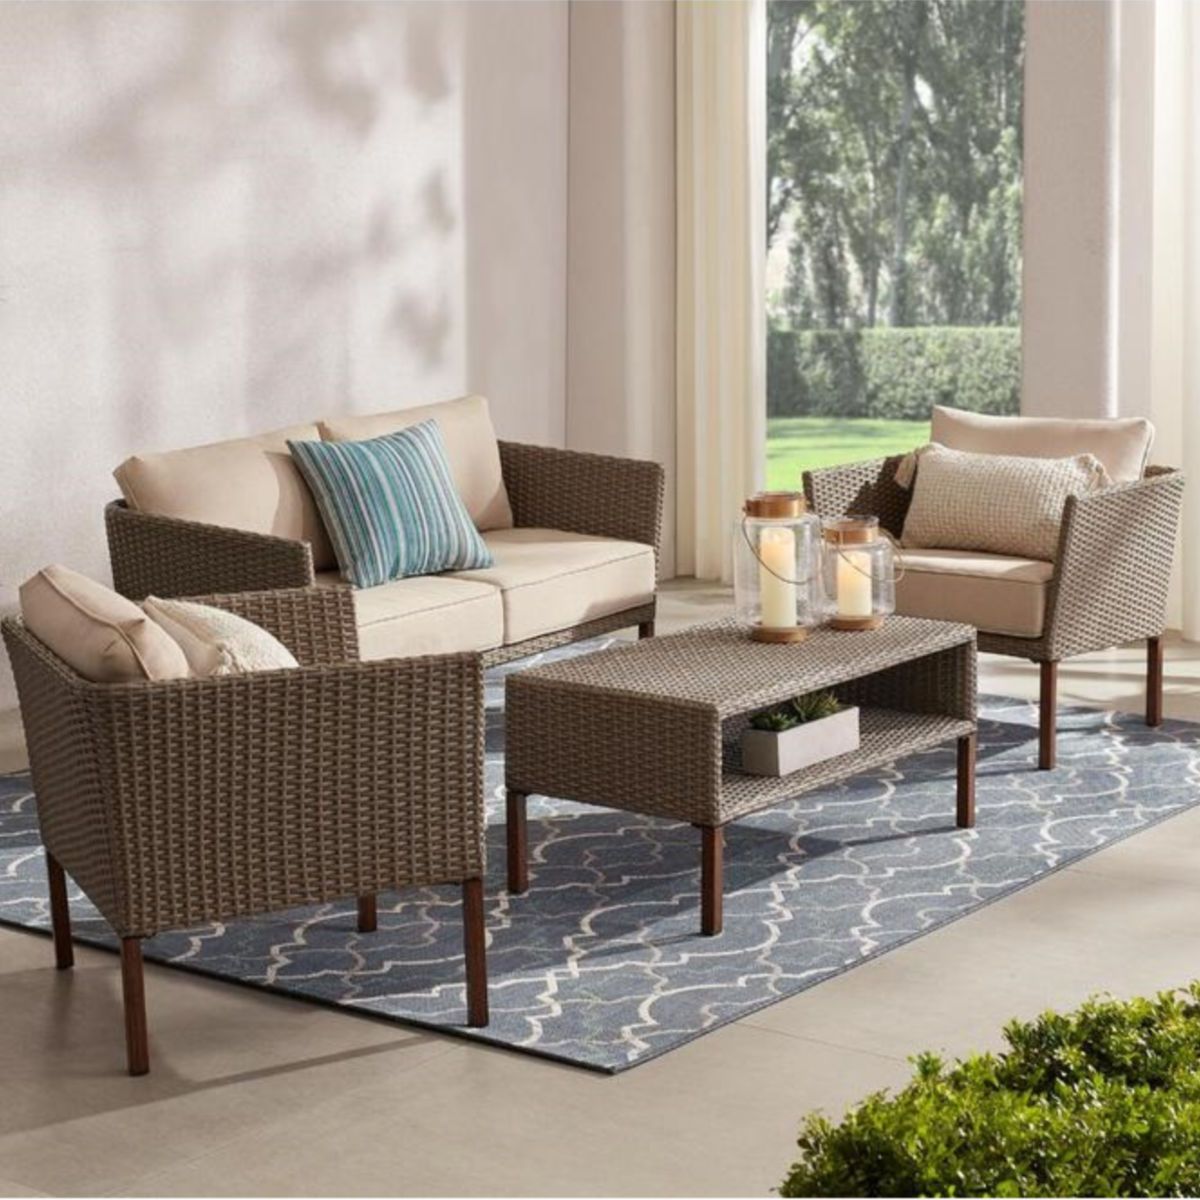 [%hampton Bay Oakshire 4pc Patio Conversation Set $399 (20% Off) @ Home Depot With Most Recently Released 4 Piece Outdoor Seating Patio Sets|4 Piece Outdoor Seating Patio Sets Pertaining To Well Liked Hampton Bay Oakshire 4pc Patio Conversation Set $399 (20% Off) @ Home Depot|most Up To Date 4 Piece Outdoor Seating Patio Sets Regarding Hampton Bay Oakshire 4pc Patio Conversation Set $399 (20% Off) @ Home Depot|most Current Hampton Bay Oakshire 4pc Patio Conversation Set $399 (20% Off) @ Home Depot For 4 Piece Outdoor Seating Patio Sets%] (View 3 of 15)